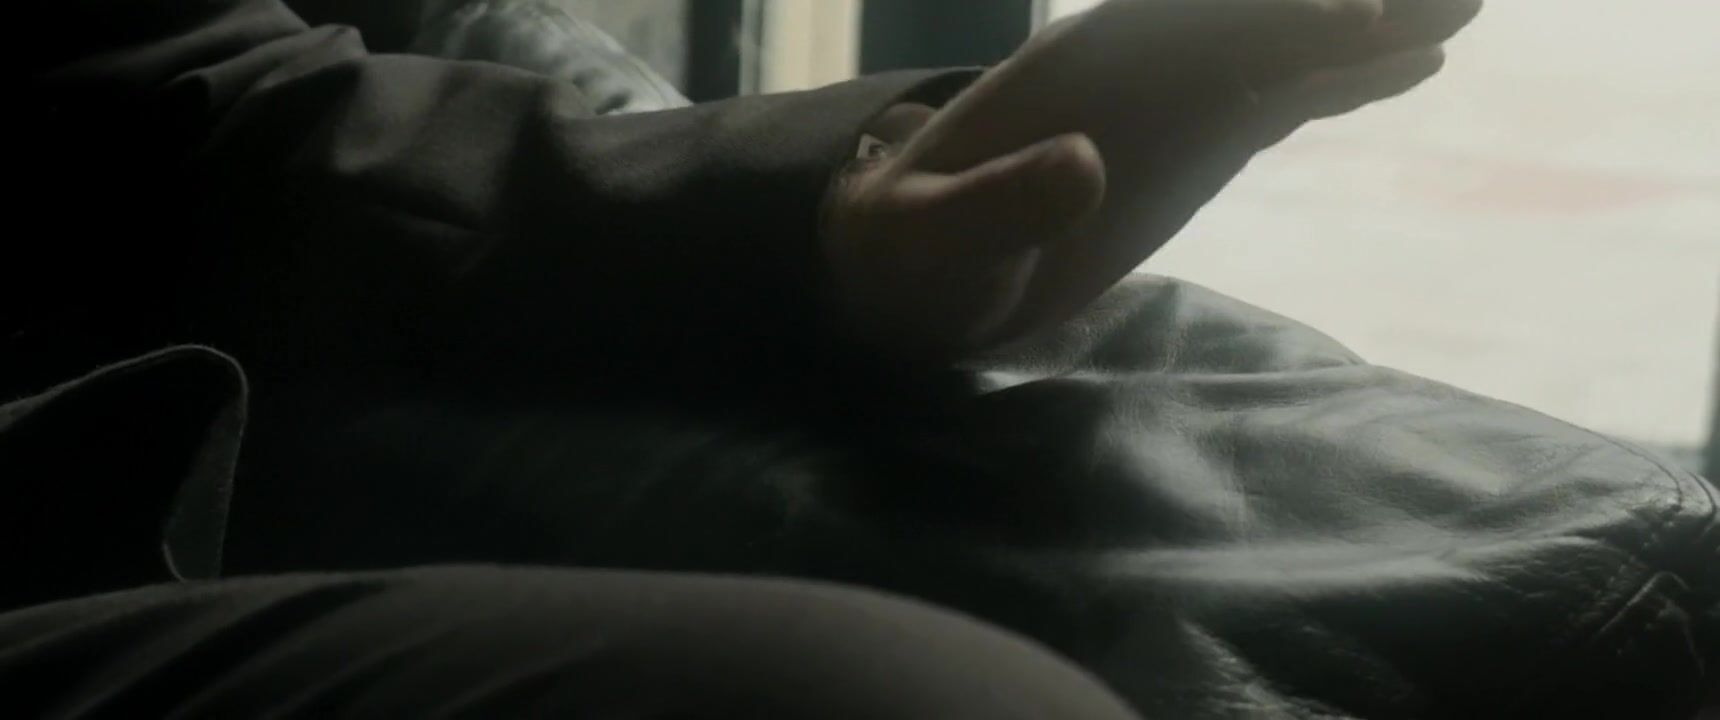 Perfect Butt Stacy Martin is about to be humped in The Lady In The Car With Glasses And A Gun (2015) Submission